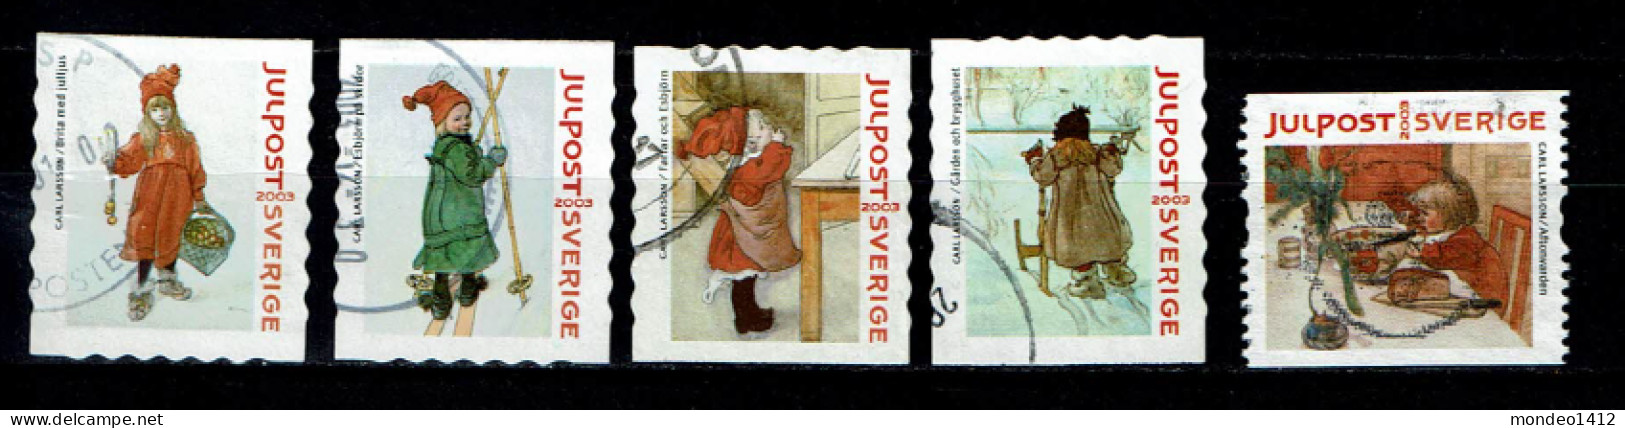 Sweden 2003 - Noël, Weihnachten, Christmas - Carl Olof Larsson, Swedish Painter - Used - Used Stamps